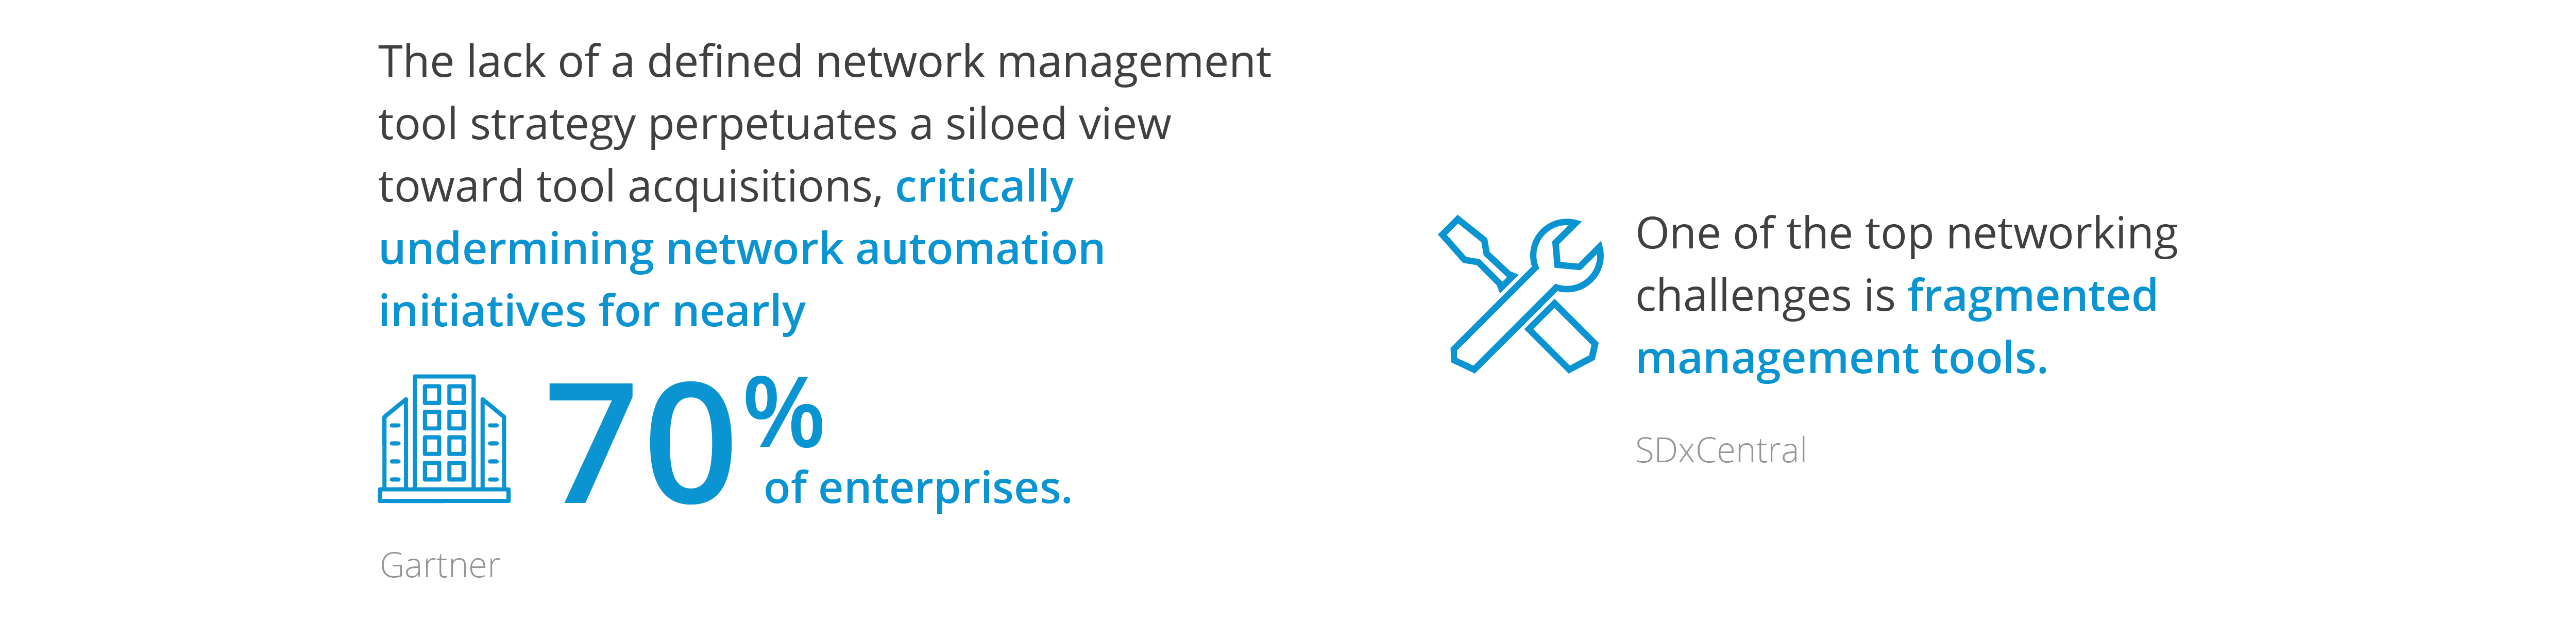 infographic stats validating that you need to leverage the right tool for the right job for network automation and orchestration